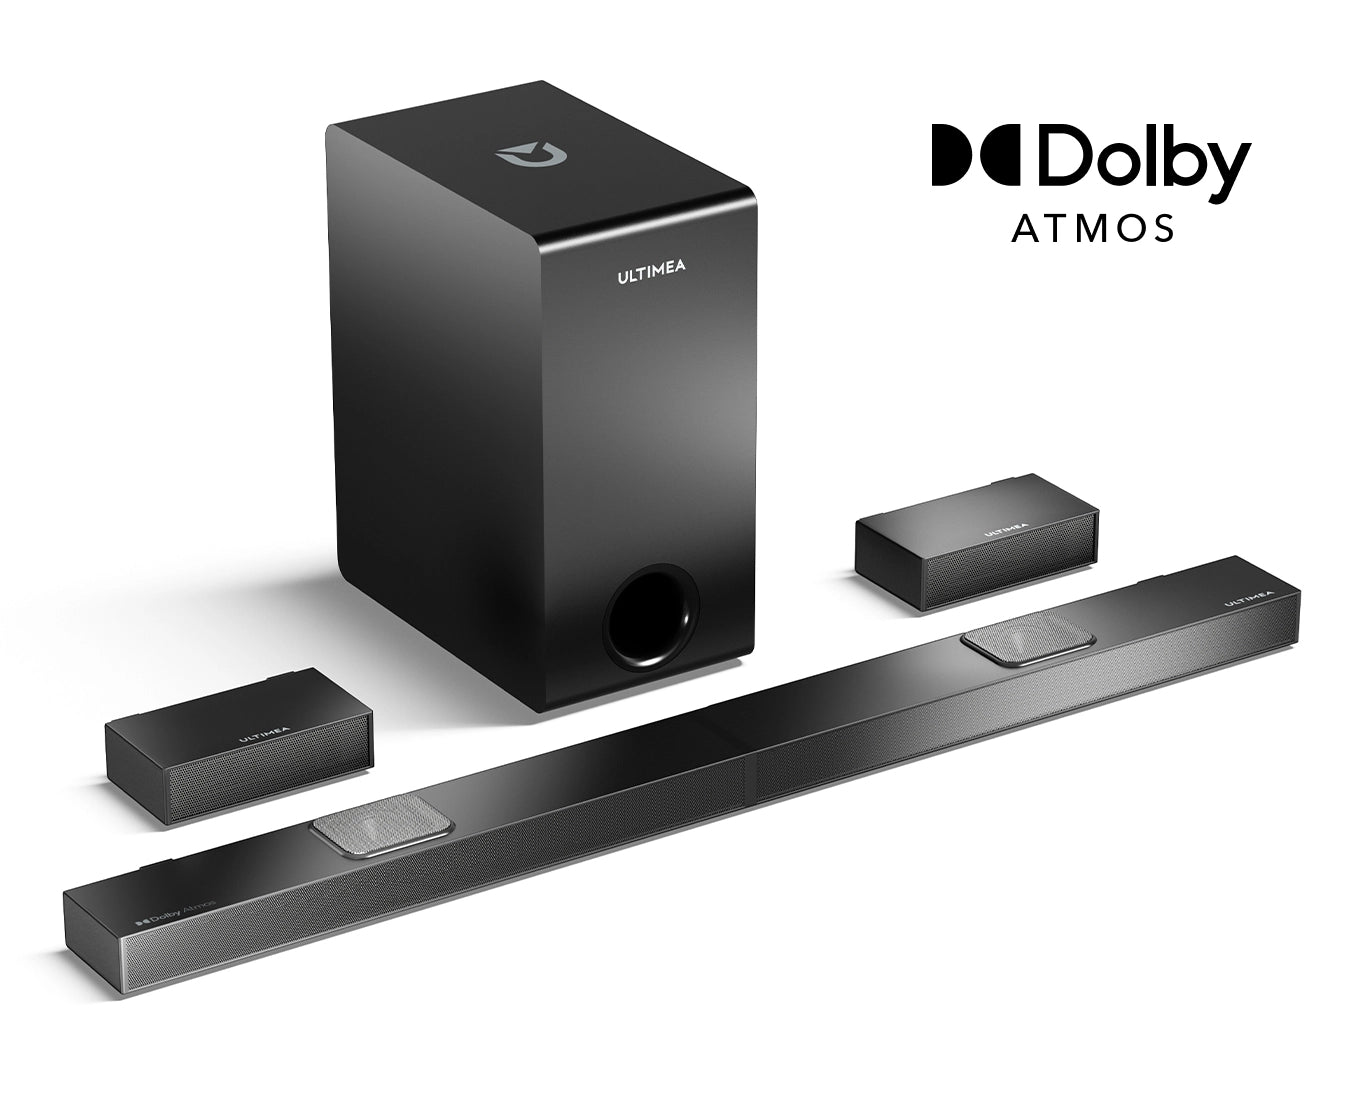 ULTIMEA Dolby Atmos Home Theater System